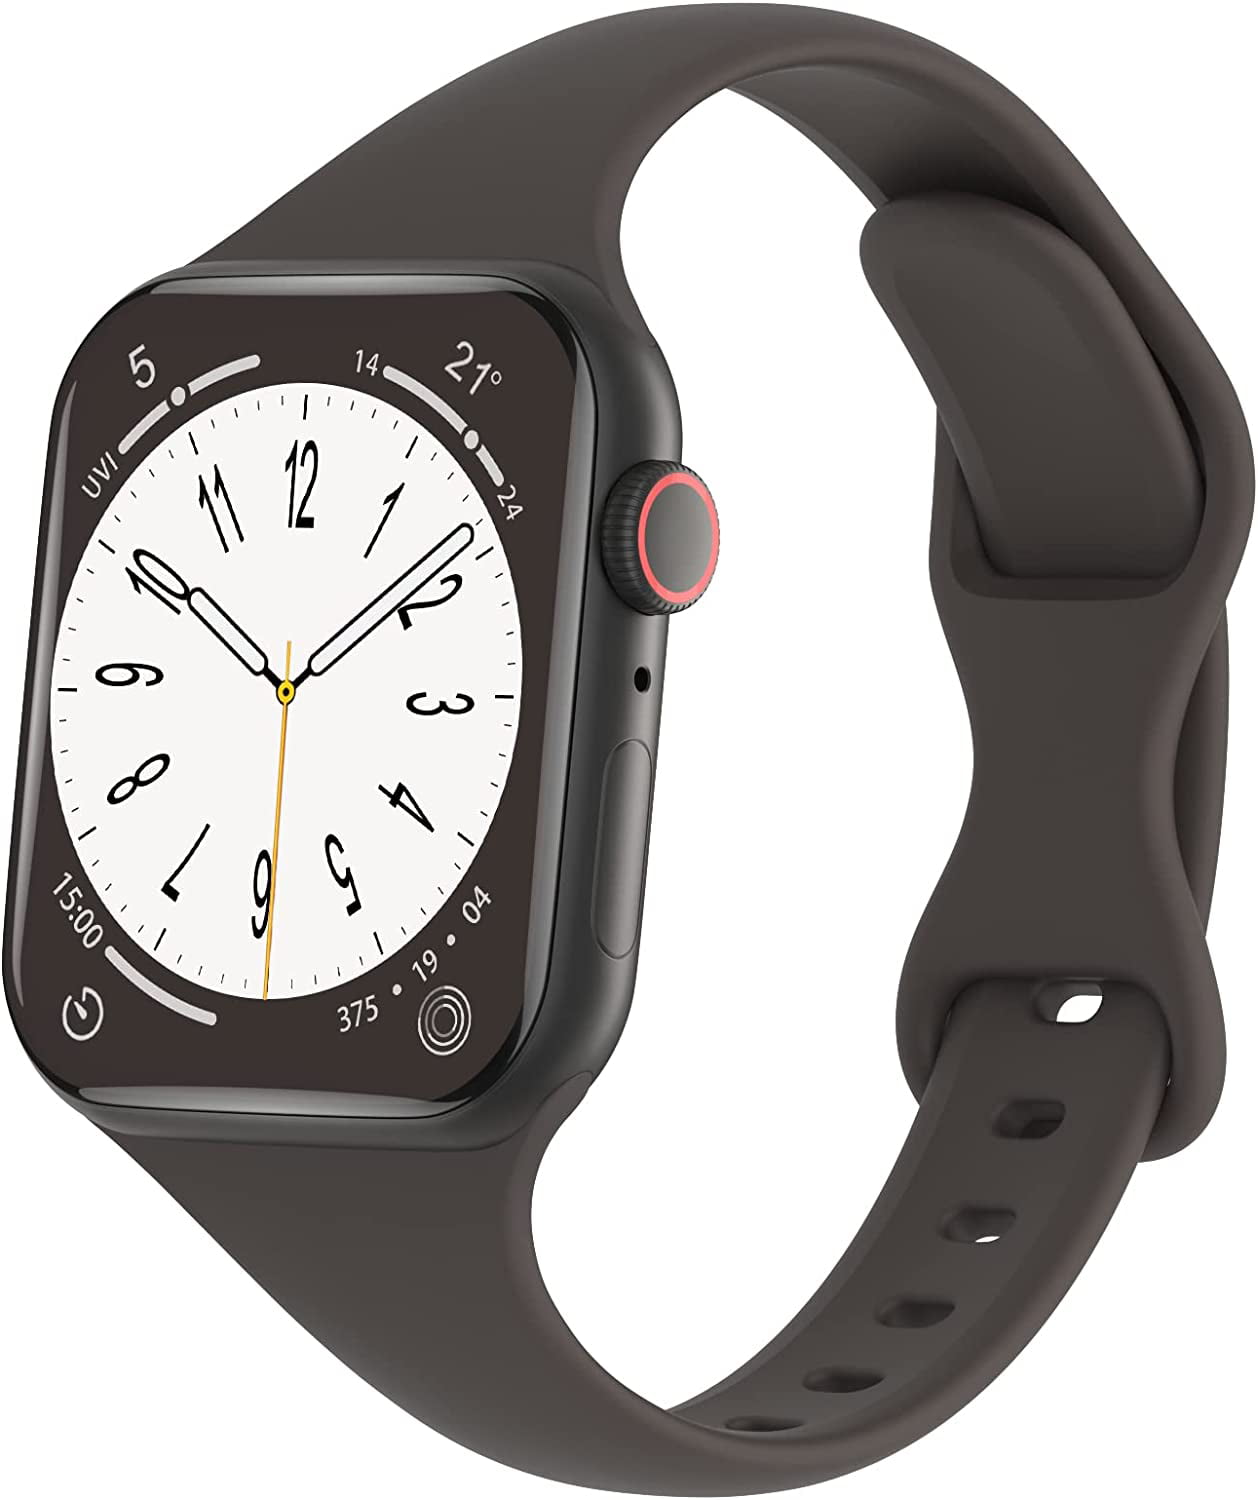 Durable & Stylish Silicone Apple Watch Bands – Shop Now!